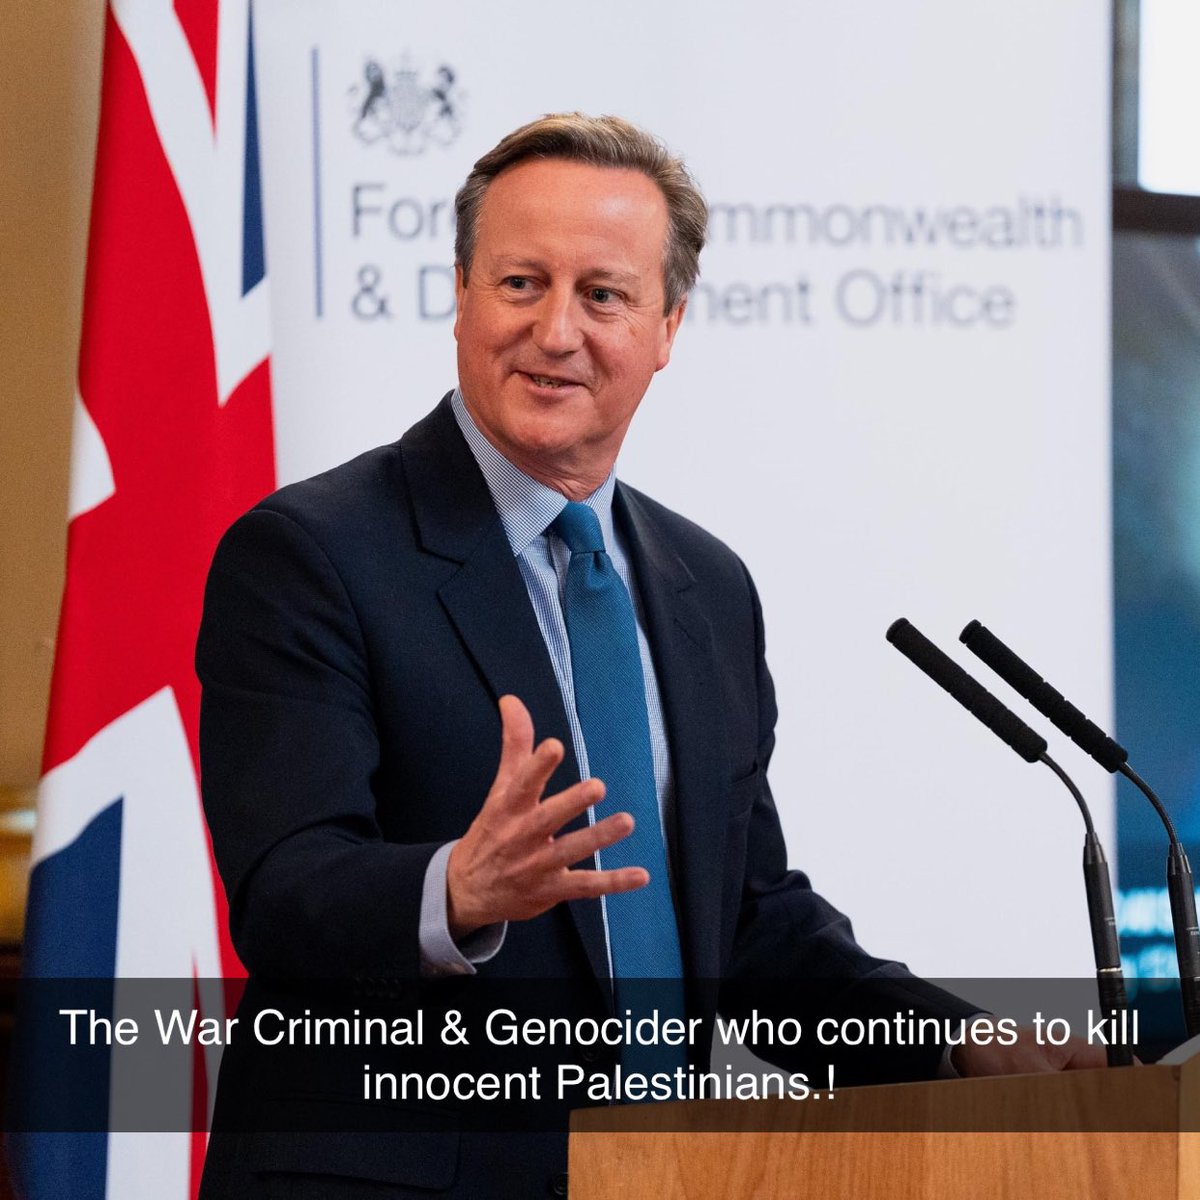 The war criminal (David Cameron) says the UK will not halt arms sales to Israel. Mr Cameron was the one who overthrow the Libyan government, killed Muammar Gaddafi and destroyed everything Libya had. Libya now has three different regimes thanks to David Cameron.